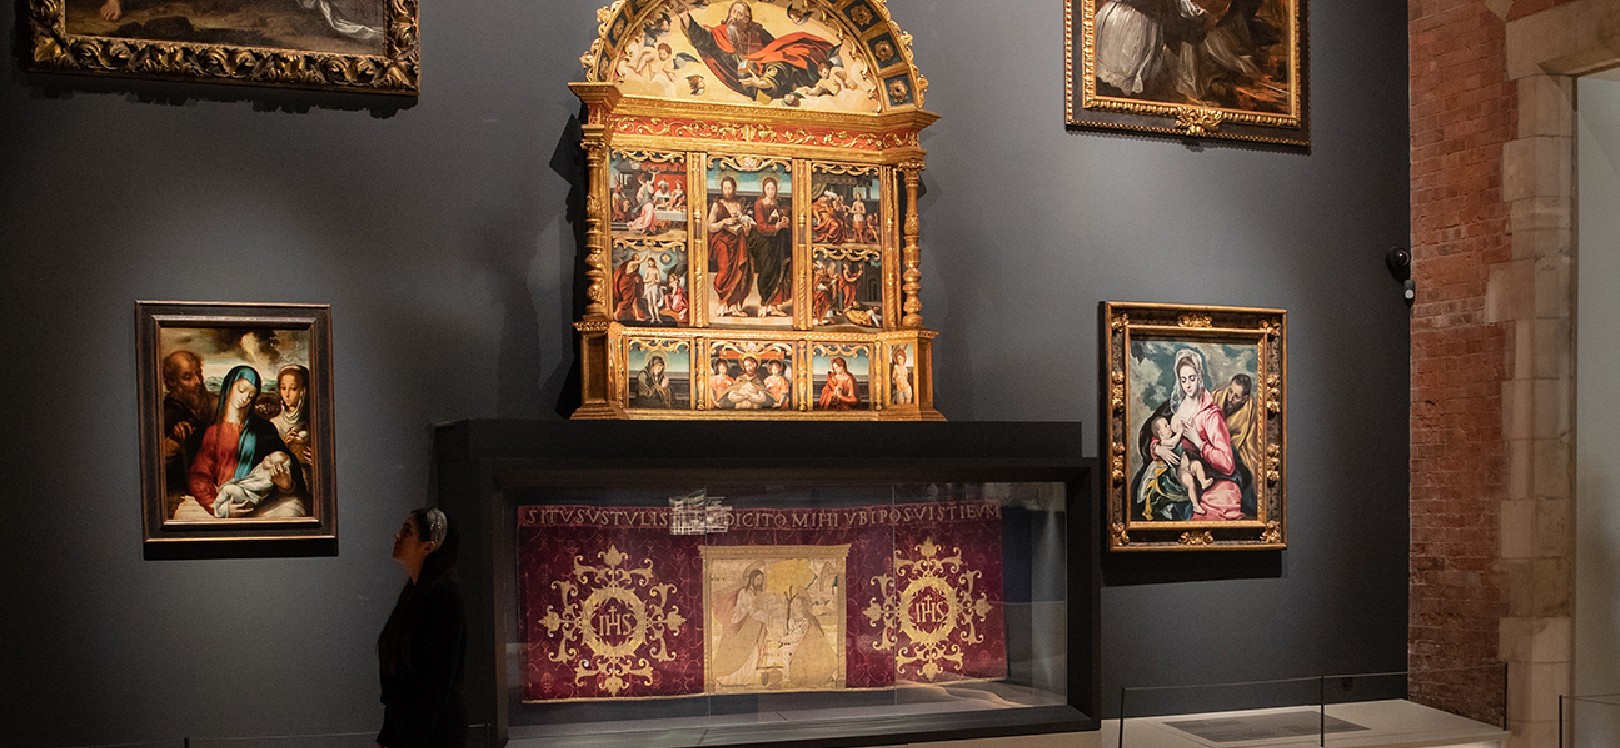 Alter in the Spanish Art Gallery